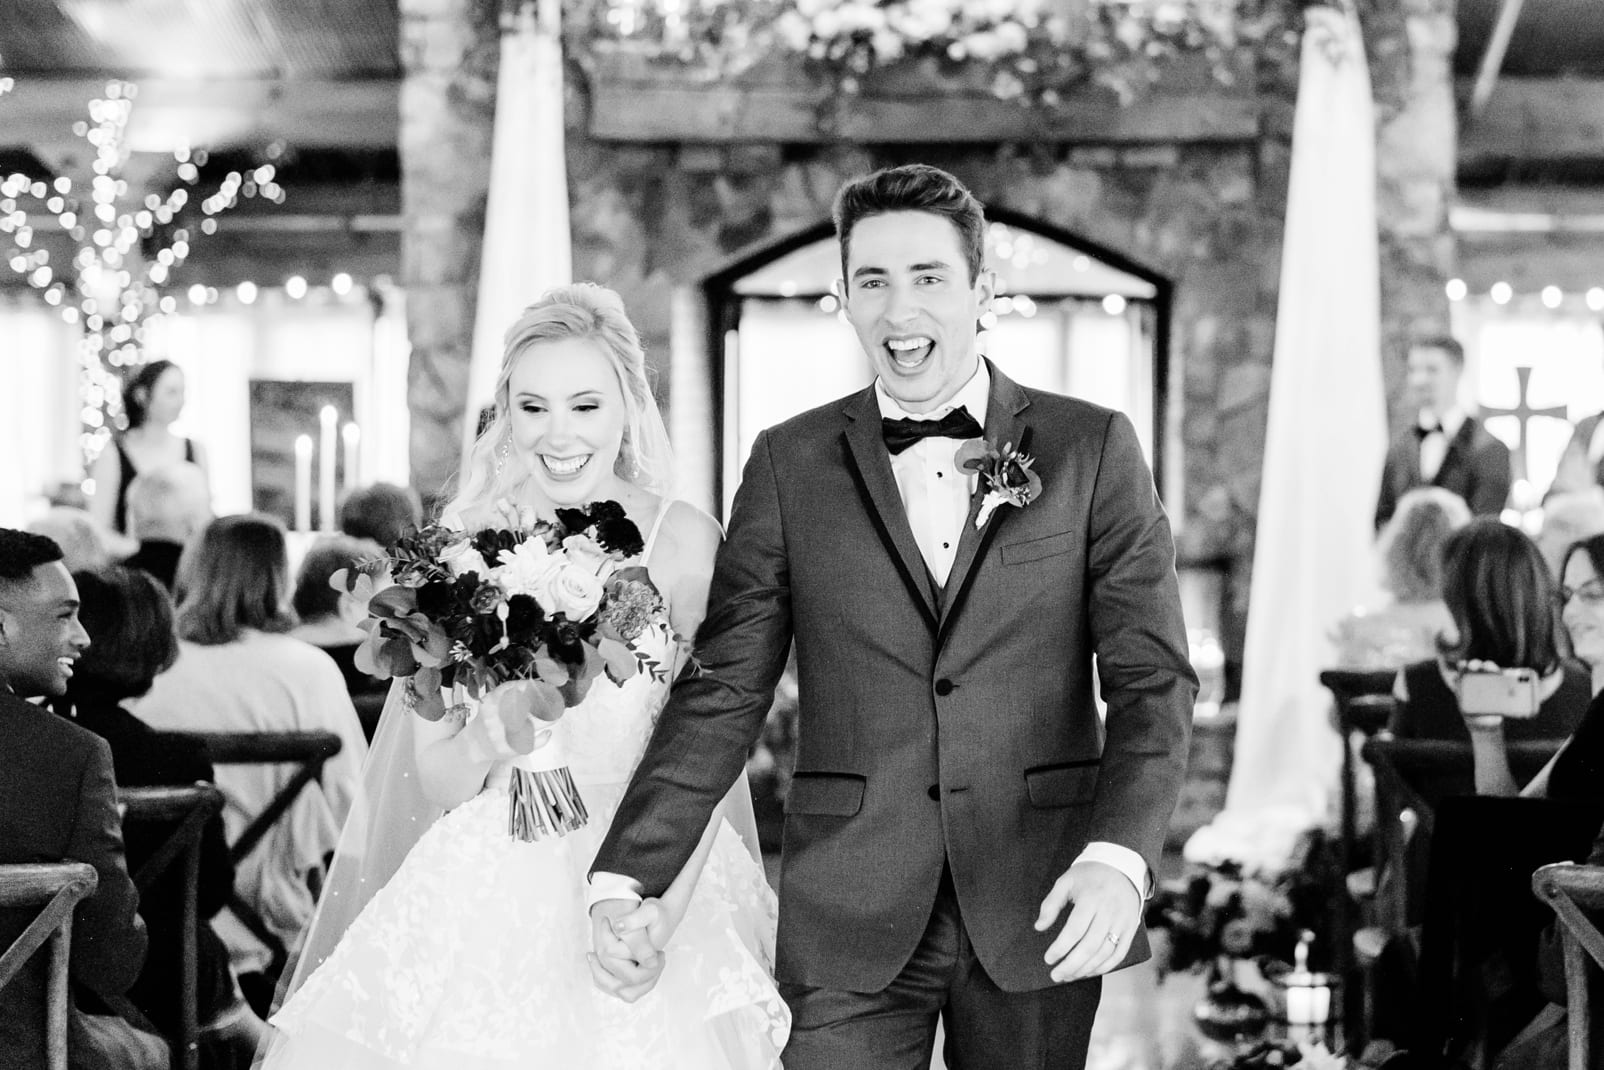 Angus Barn bride and groom holding hands coming down the aisle just married black and white photo